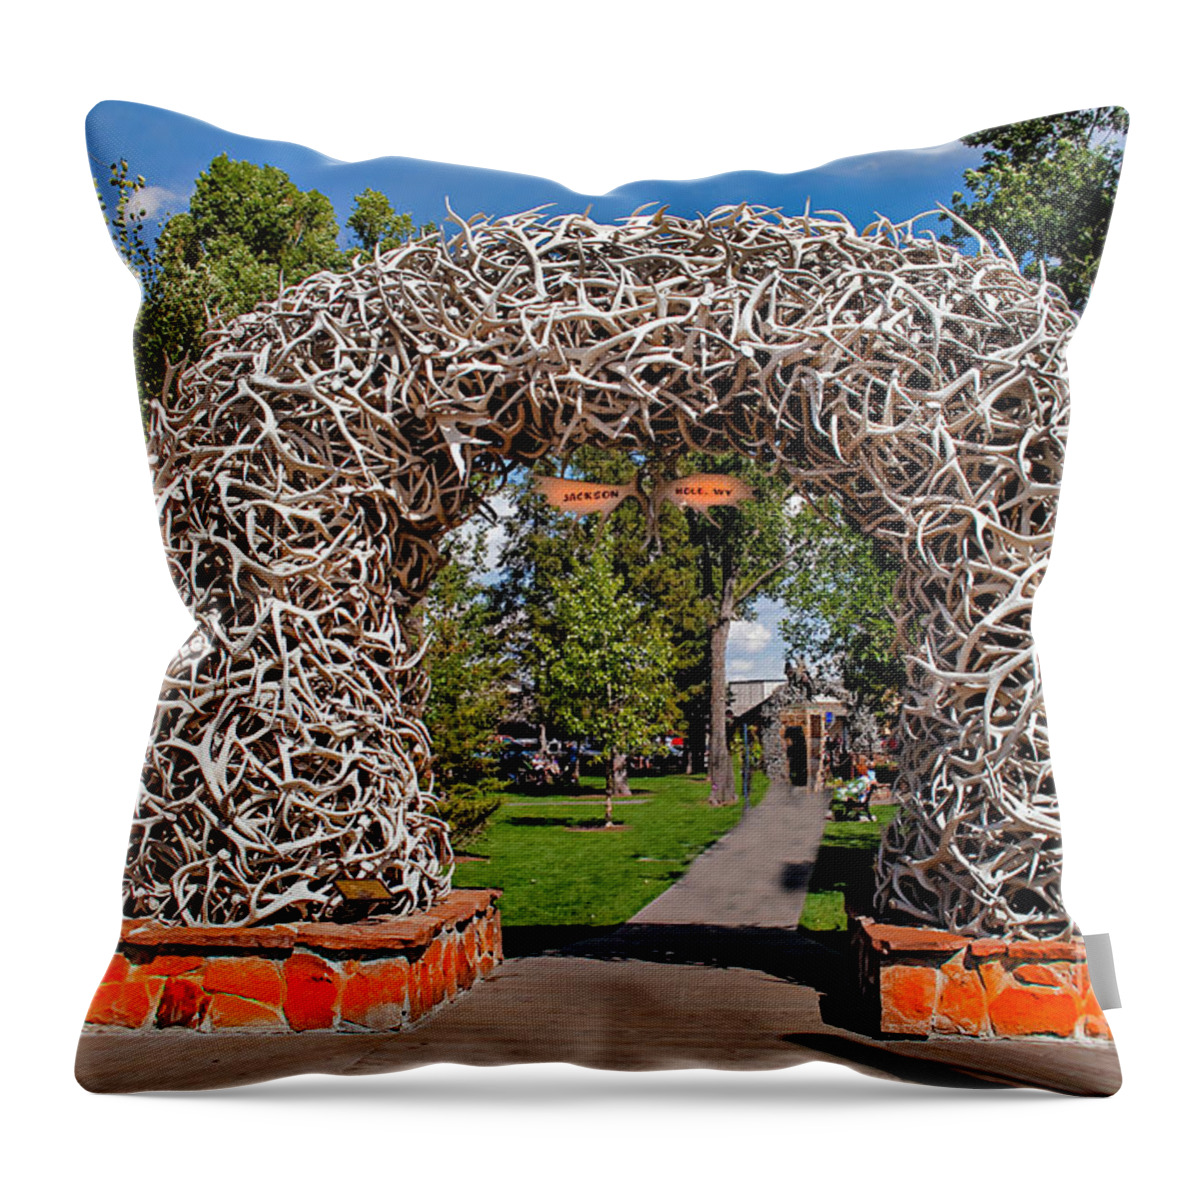 Haybales Throw Pillow featuring the photograph Jackson Hole by Robert Bales